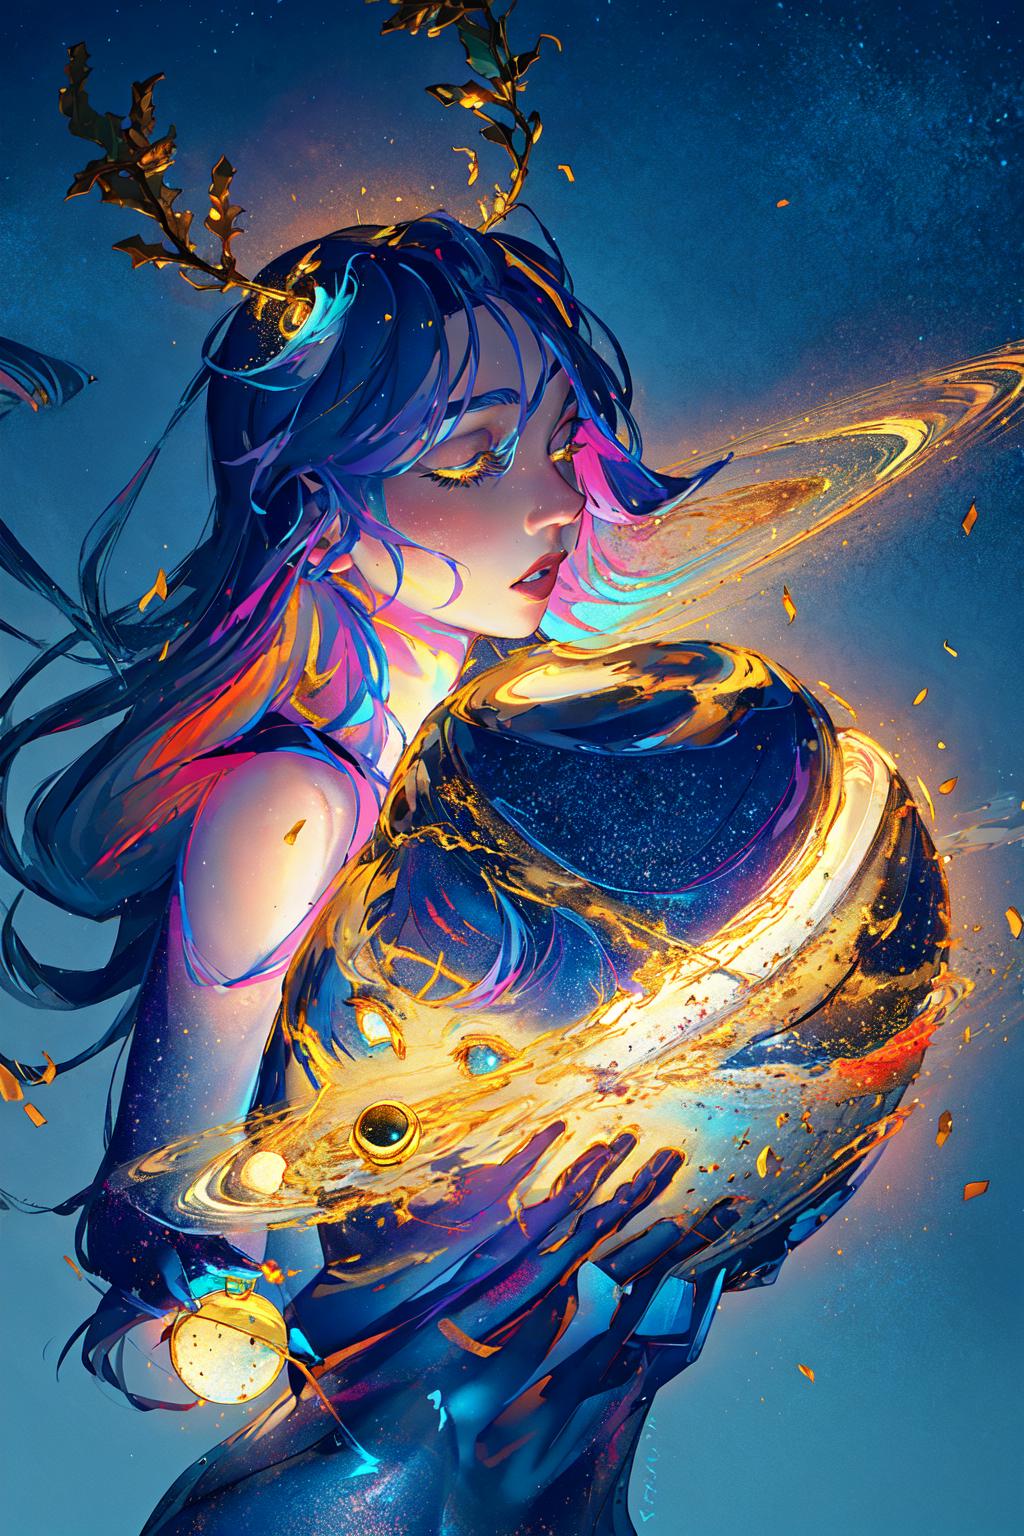 Starry Girl image by Eisthol